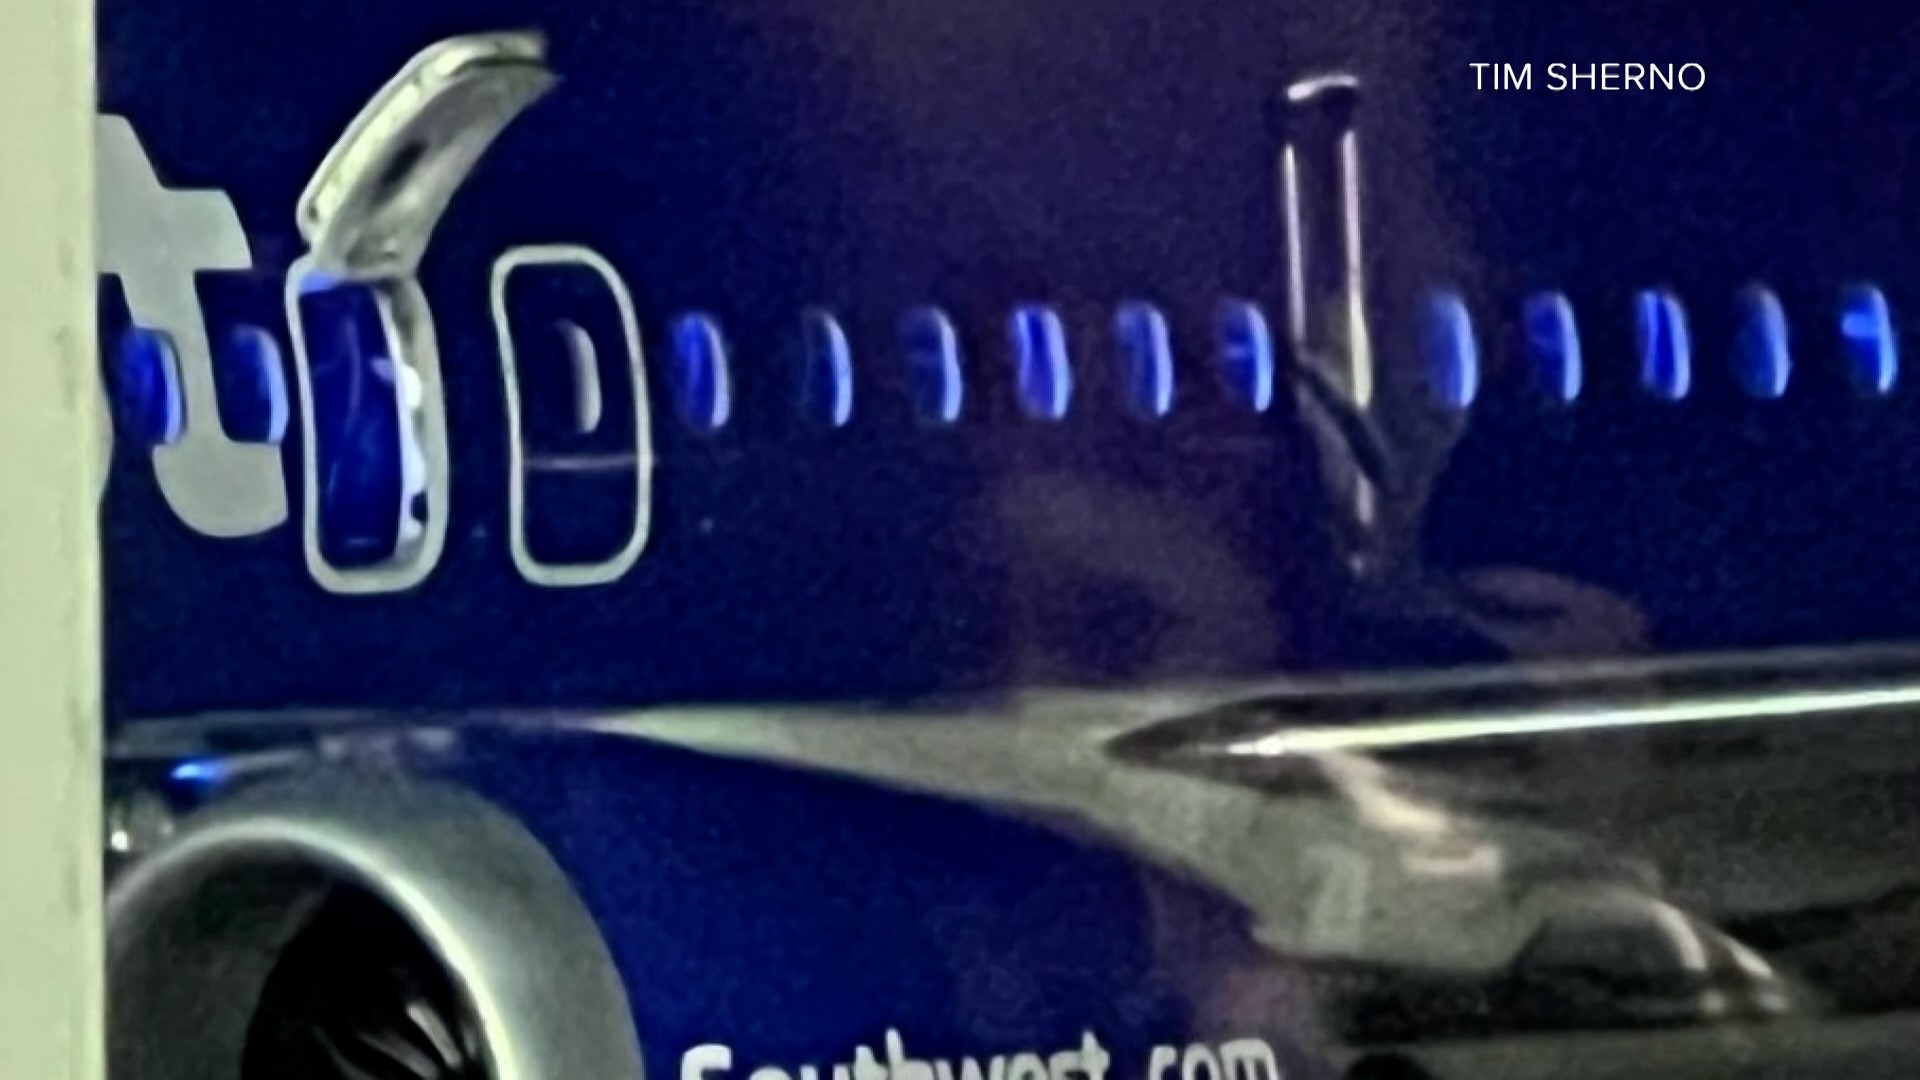 Passengers say they saw a man open the emergency door on a Southwest flight Sunday evening.